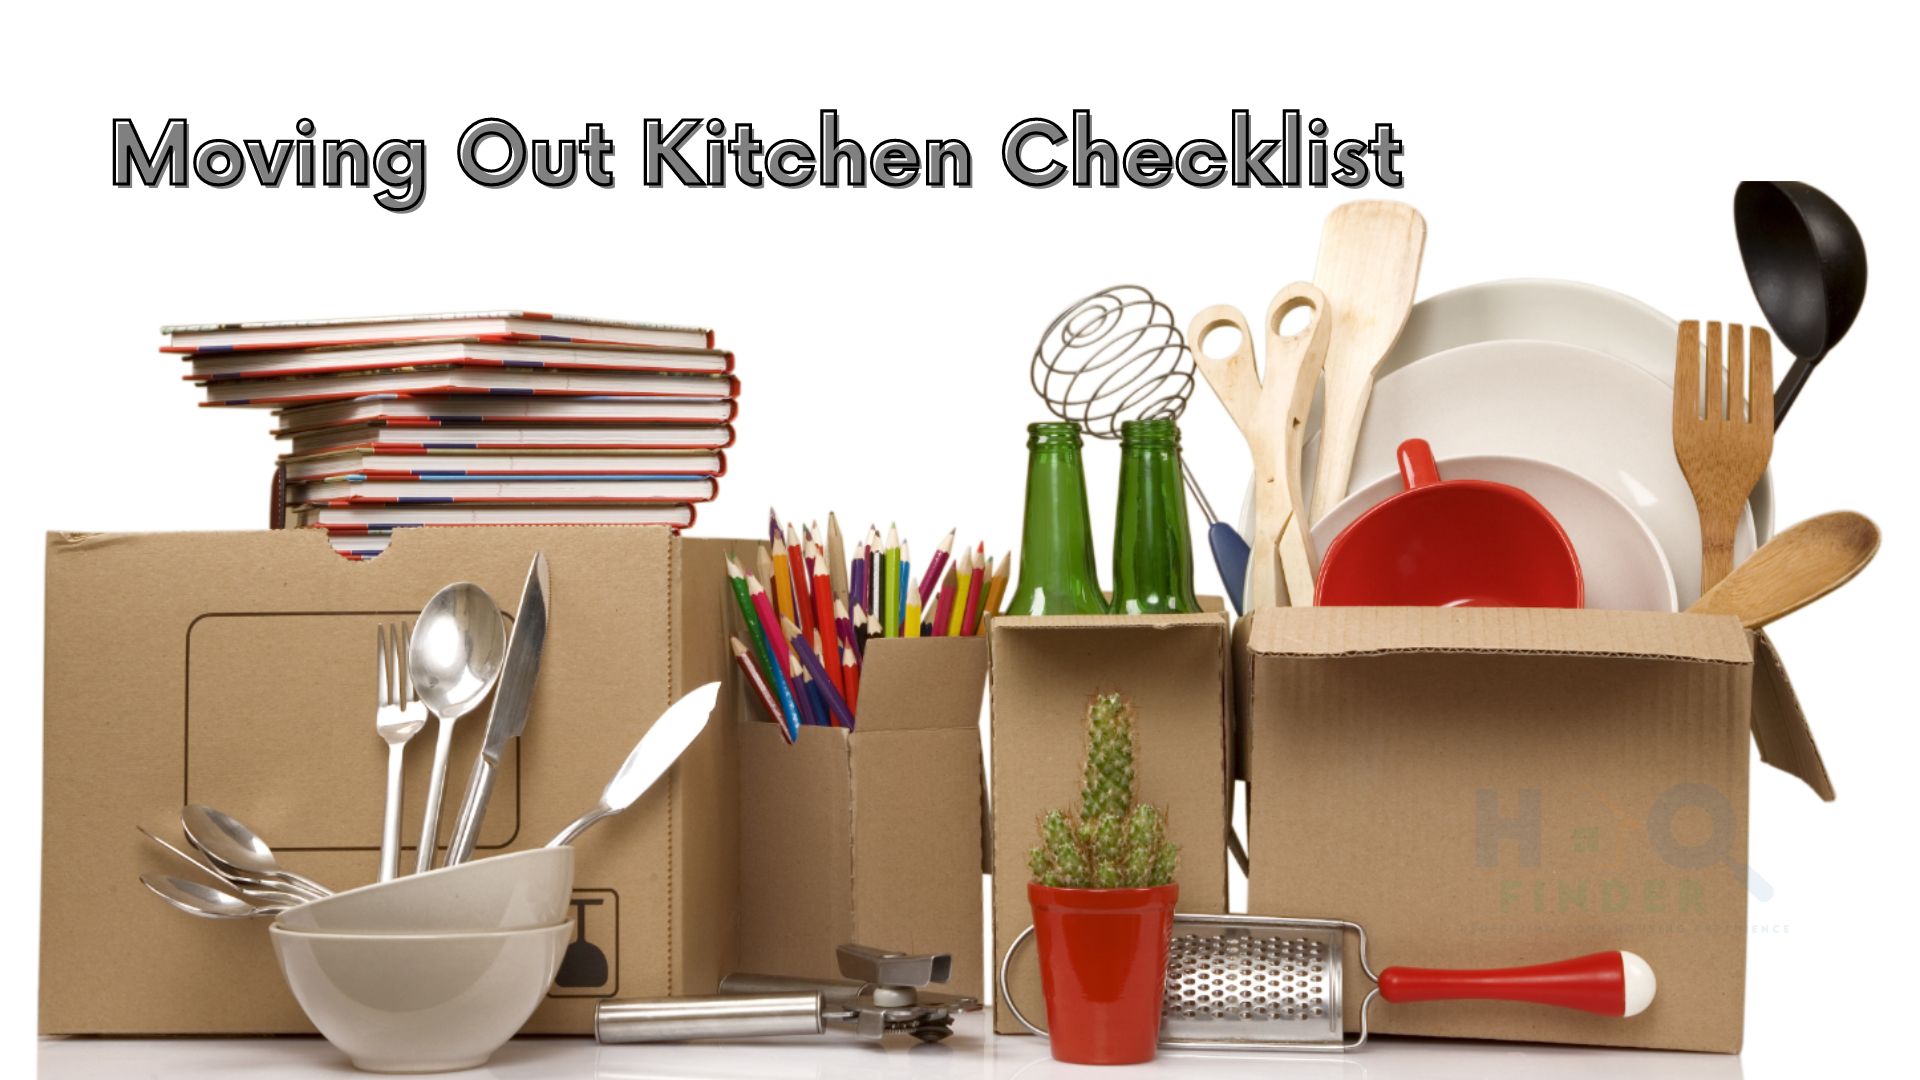 Moving Out Kitchen Checklist: Setting Up Your Kitchen